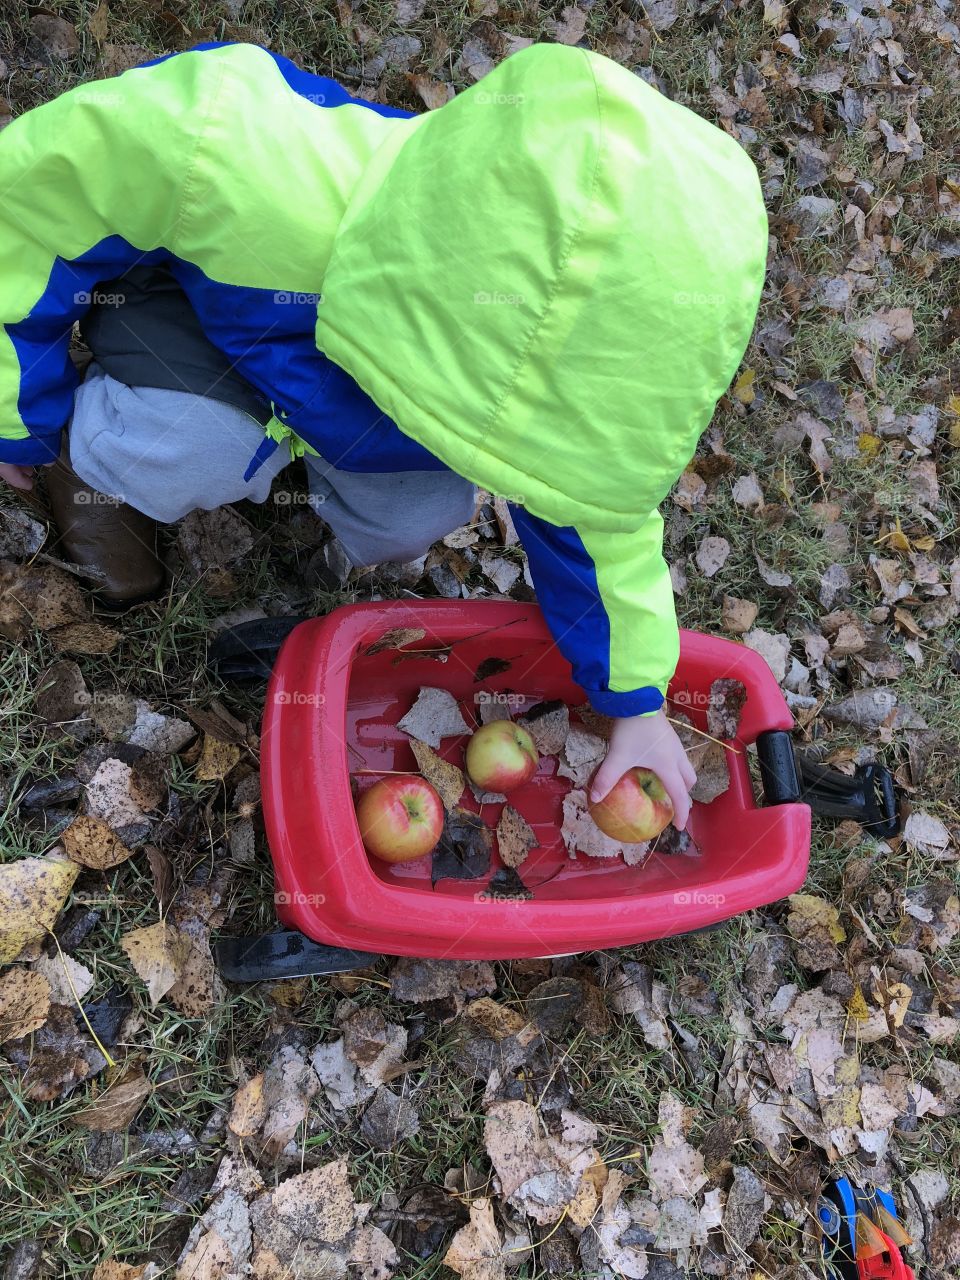 A rainy day and apples